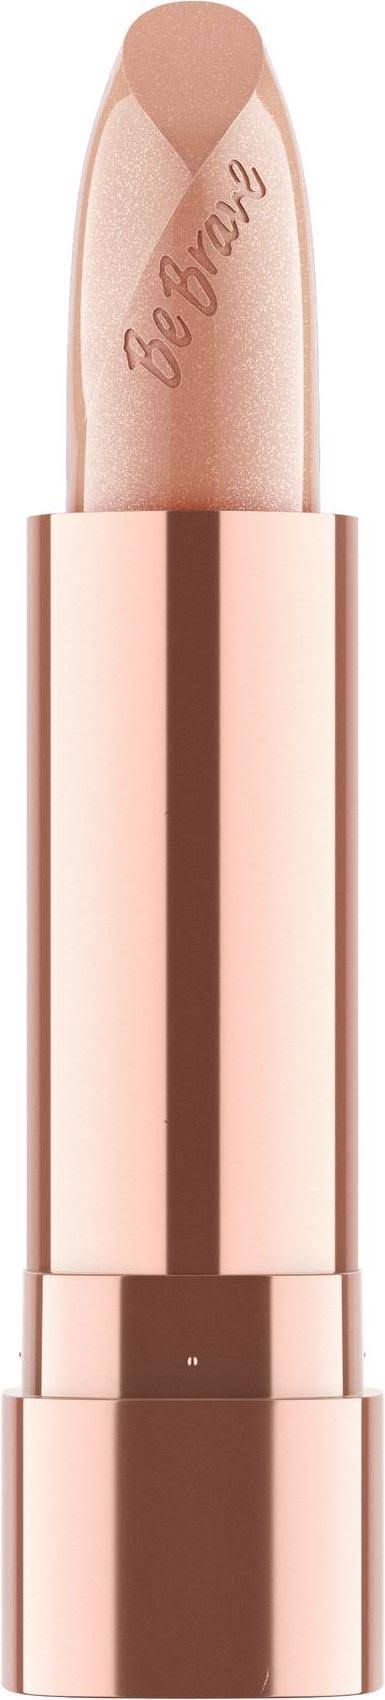 Catrice Power Plumping Gel Lipstick - 010 My Lips My Rules